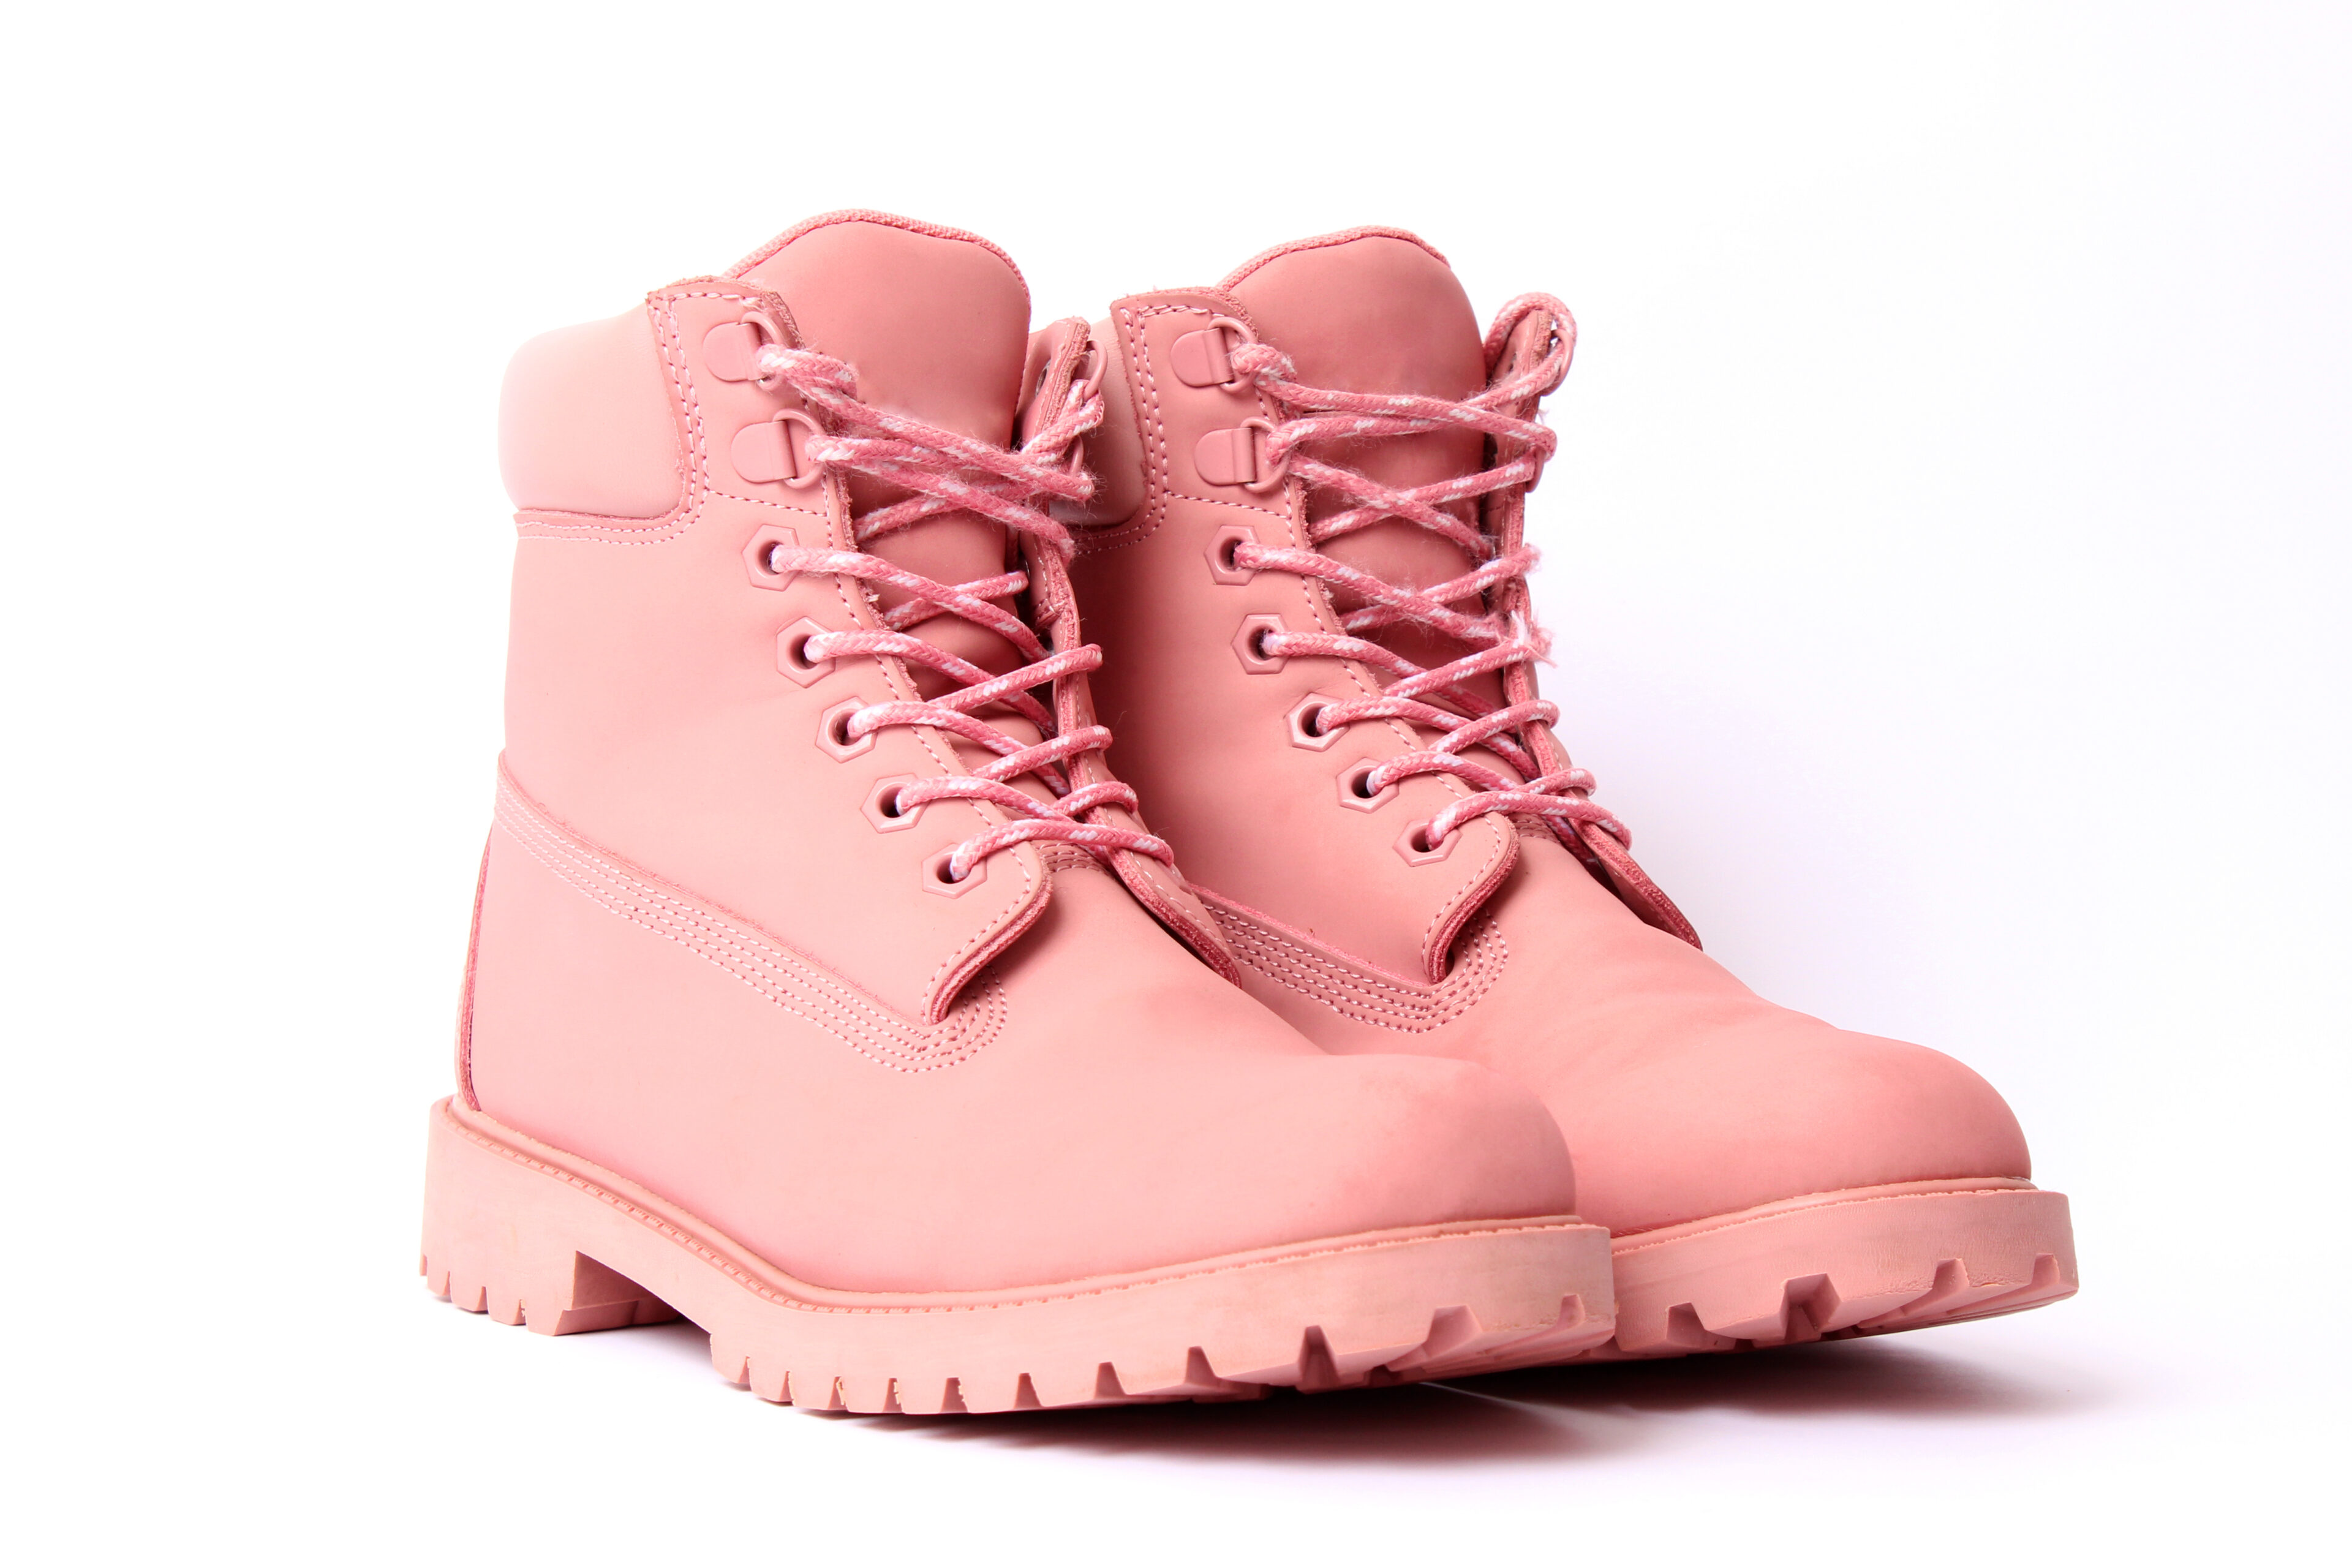 Winter Boots are Pink in Color